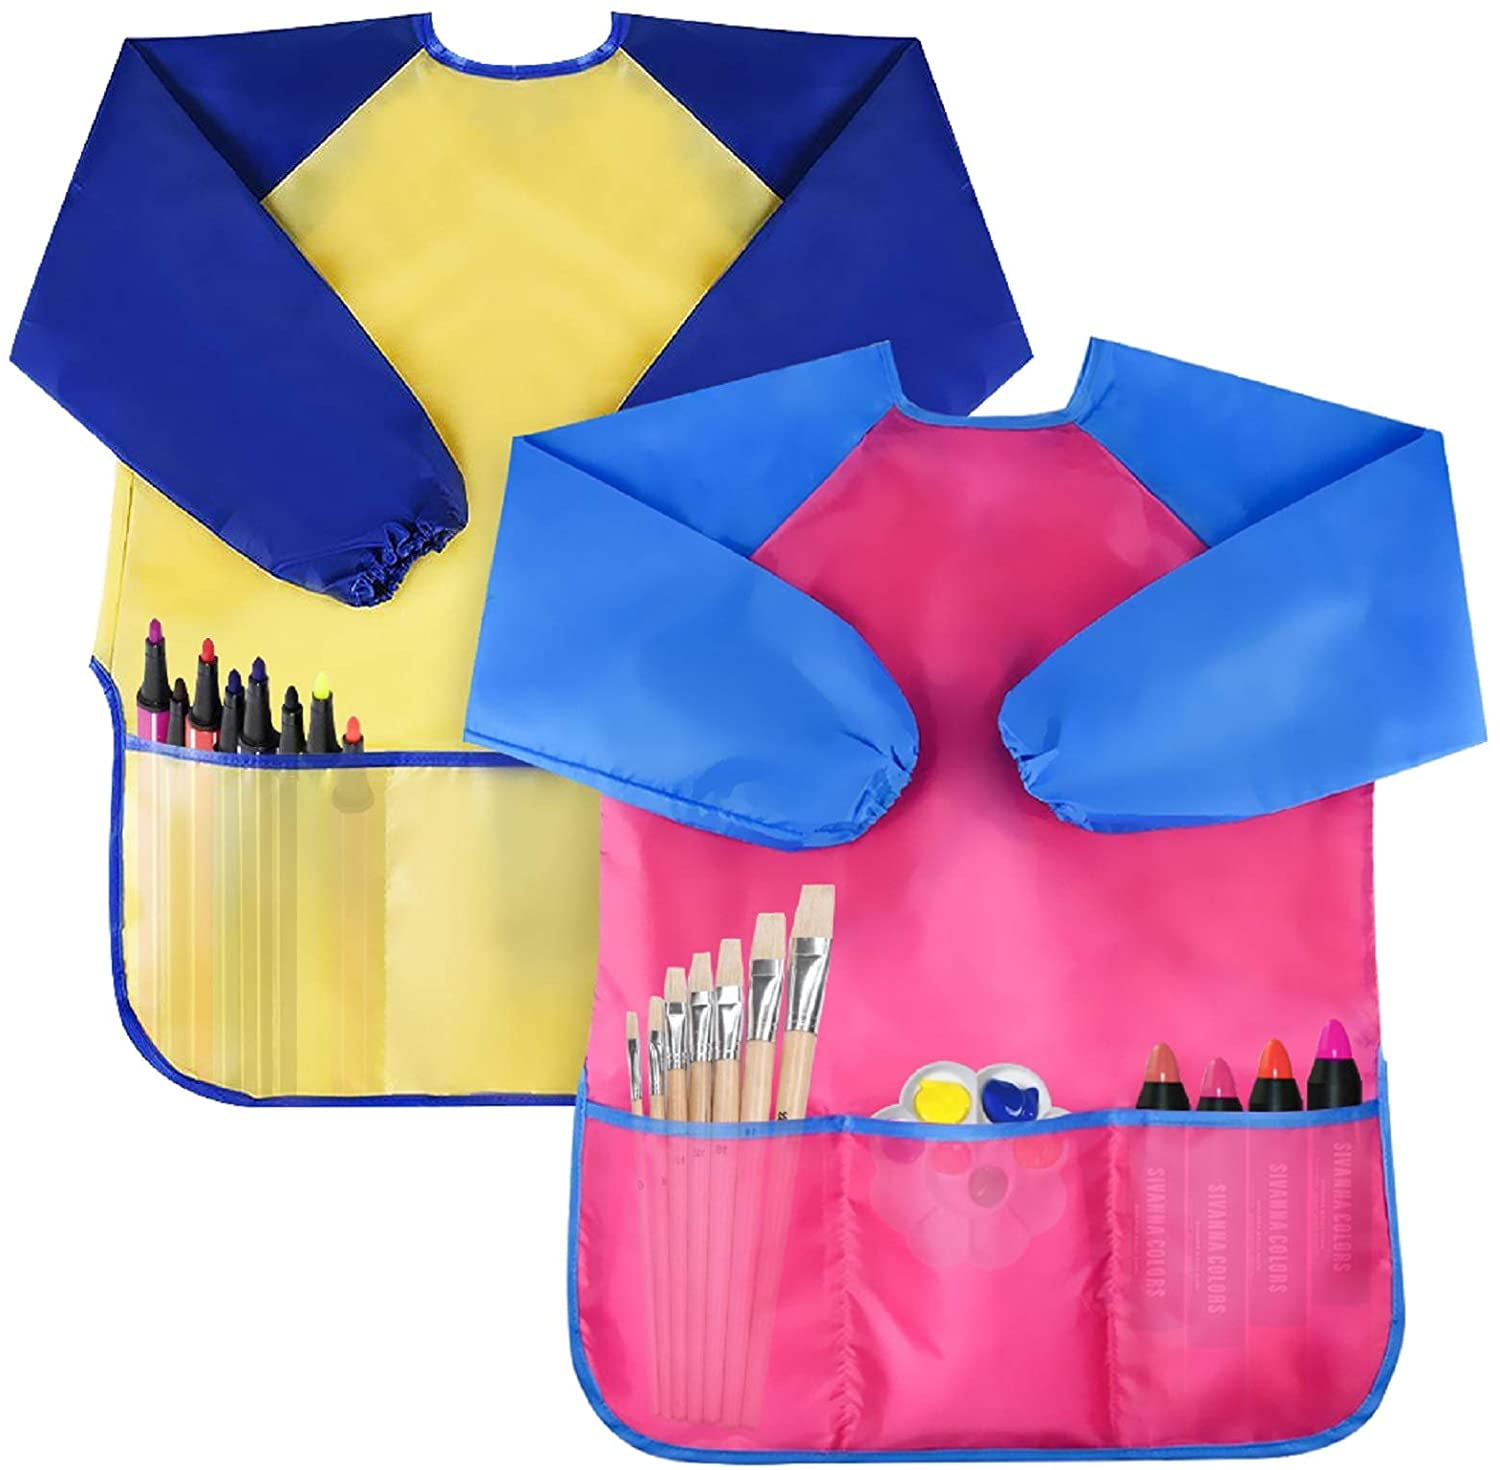 Cubaco 4 Pack Children Waterproof Artist Painting Aprons Kids Art Smocks with Long Sleeve and 3 Pockets for Age 3-8 Years